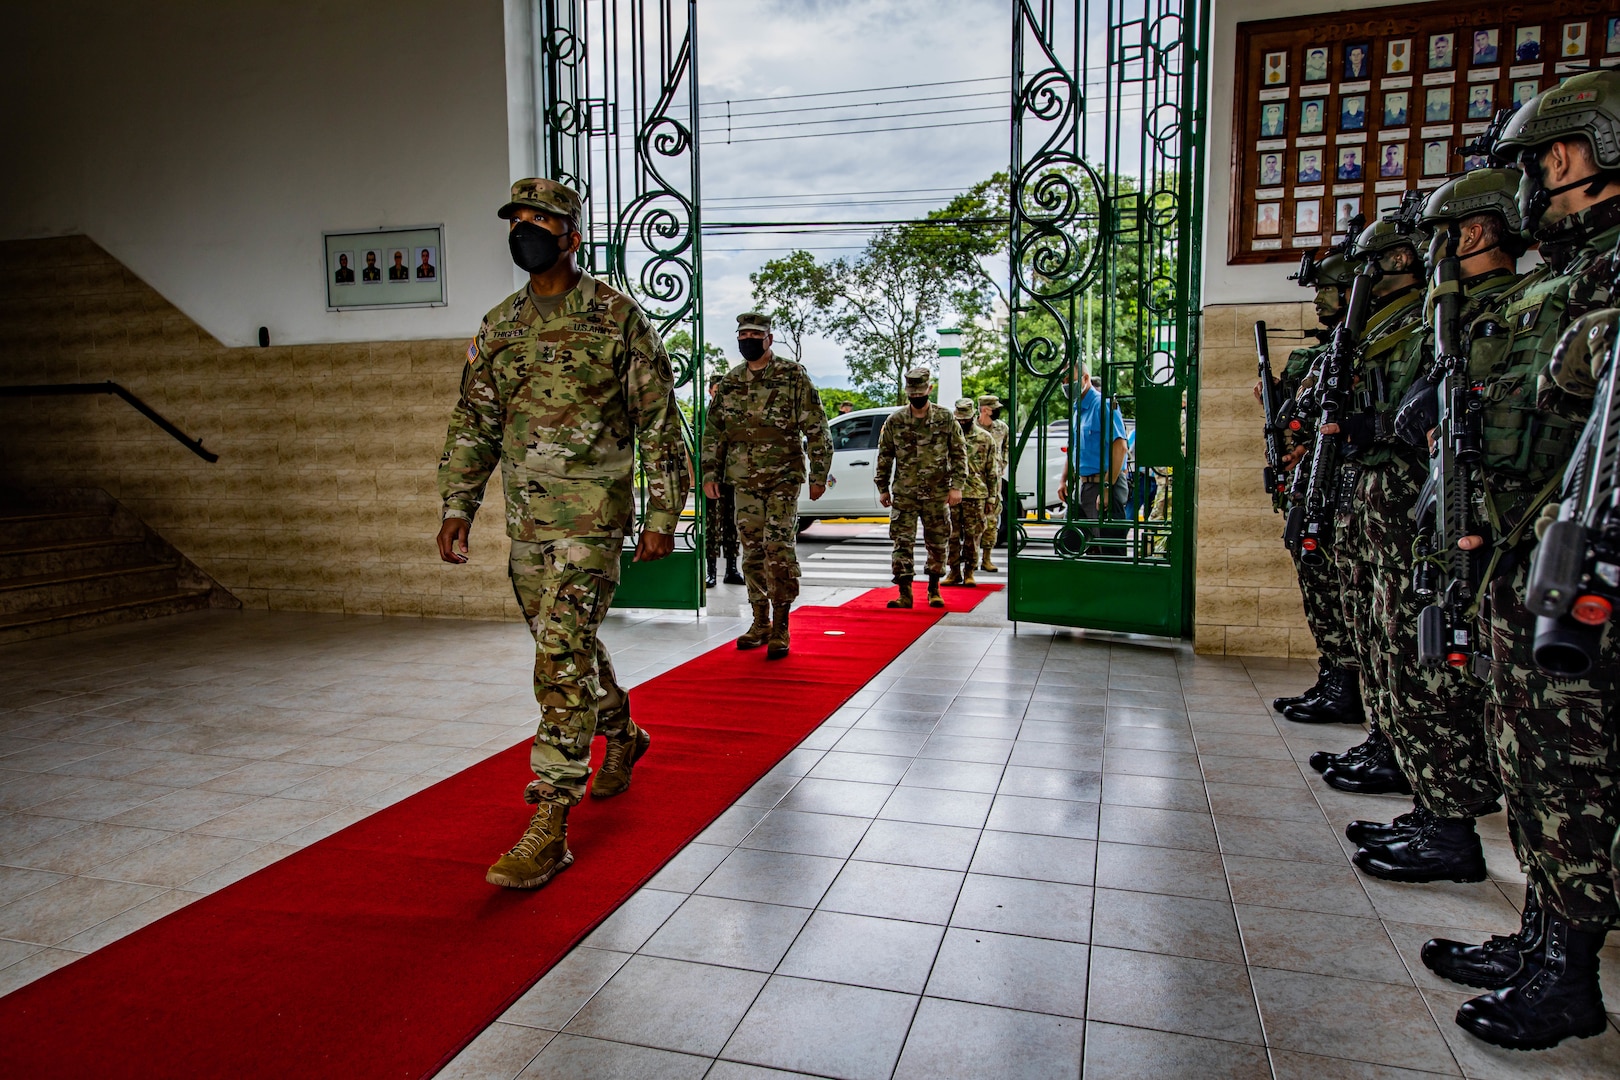 Bilateral military exercise Southern Vanguard 22 begins in Brazil